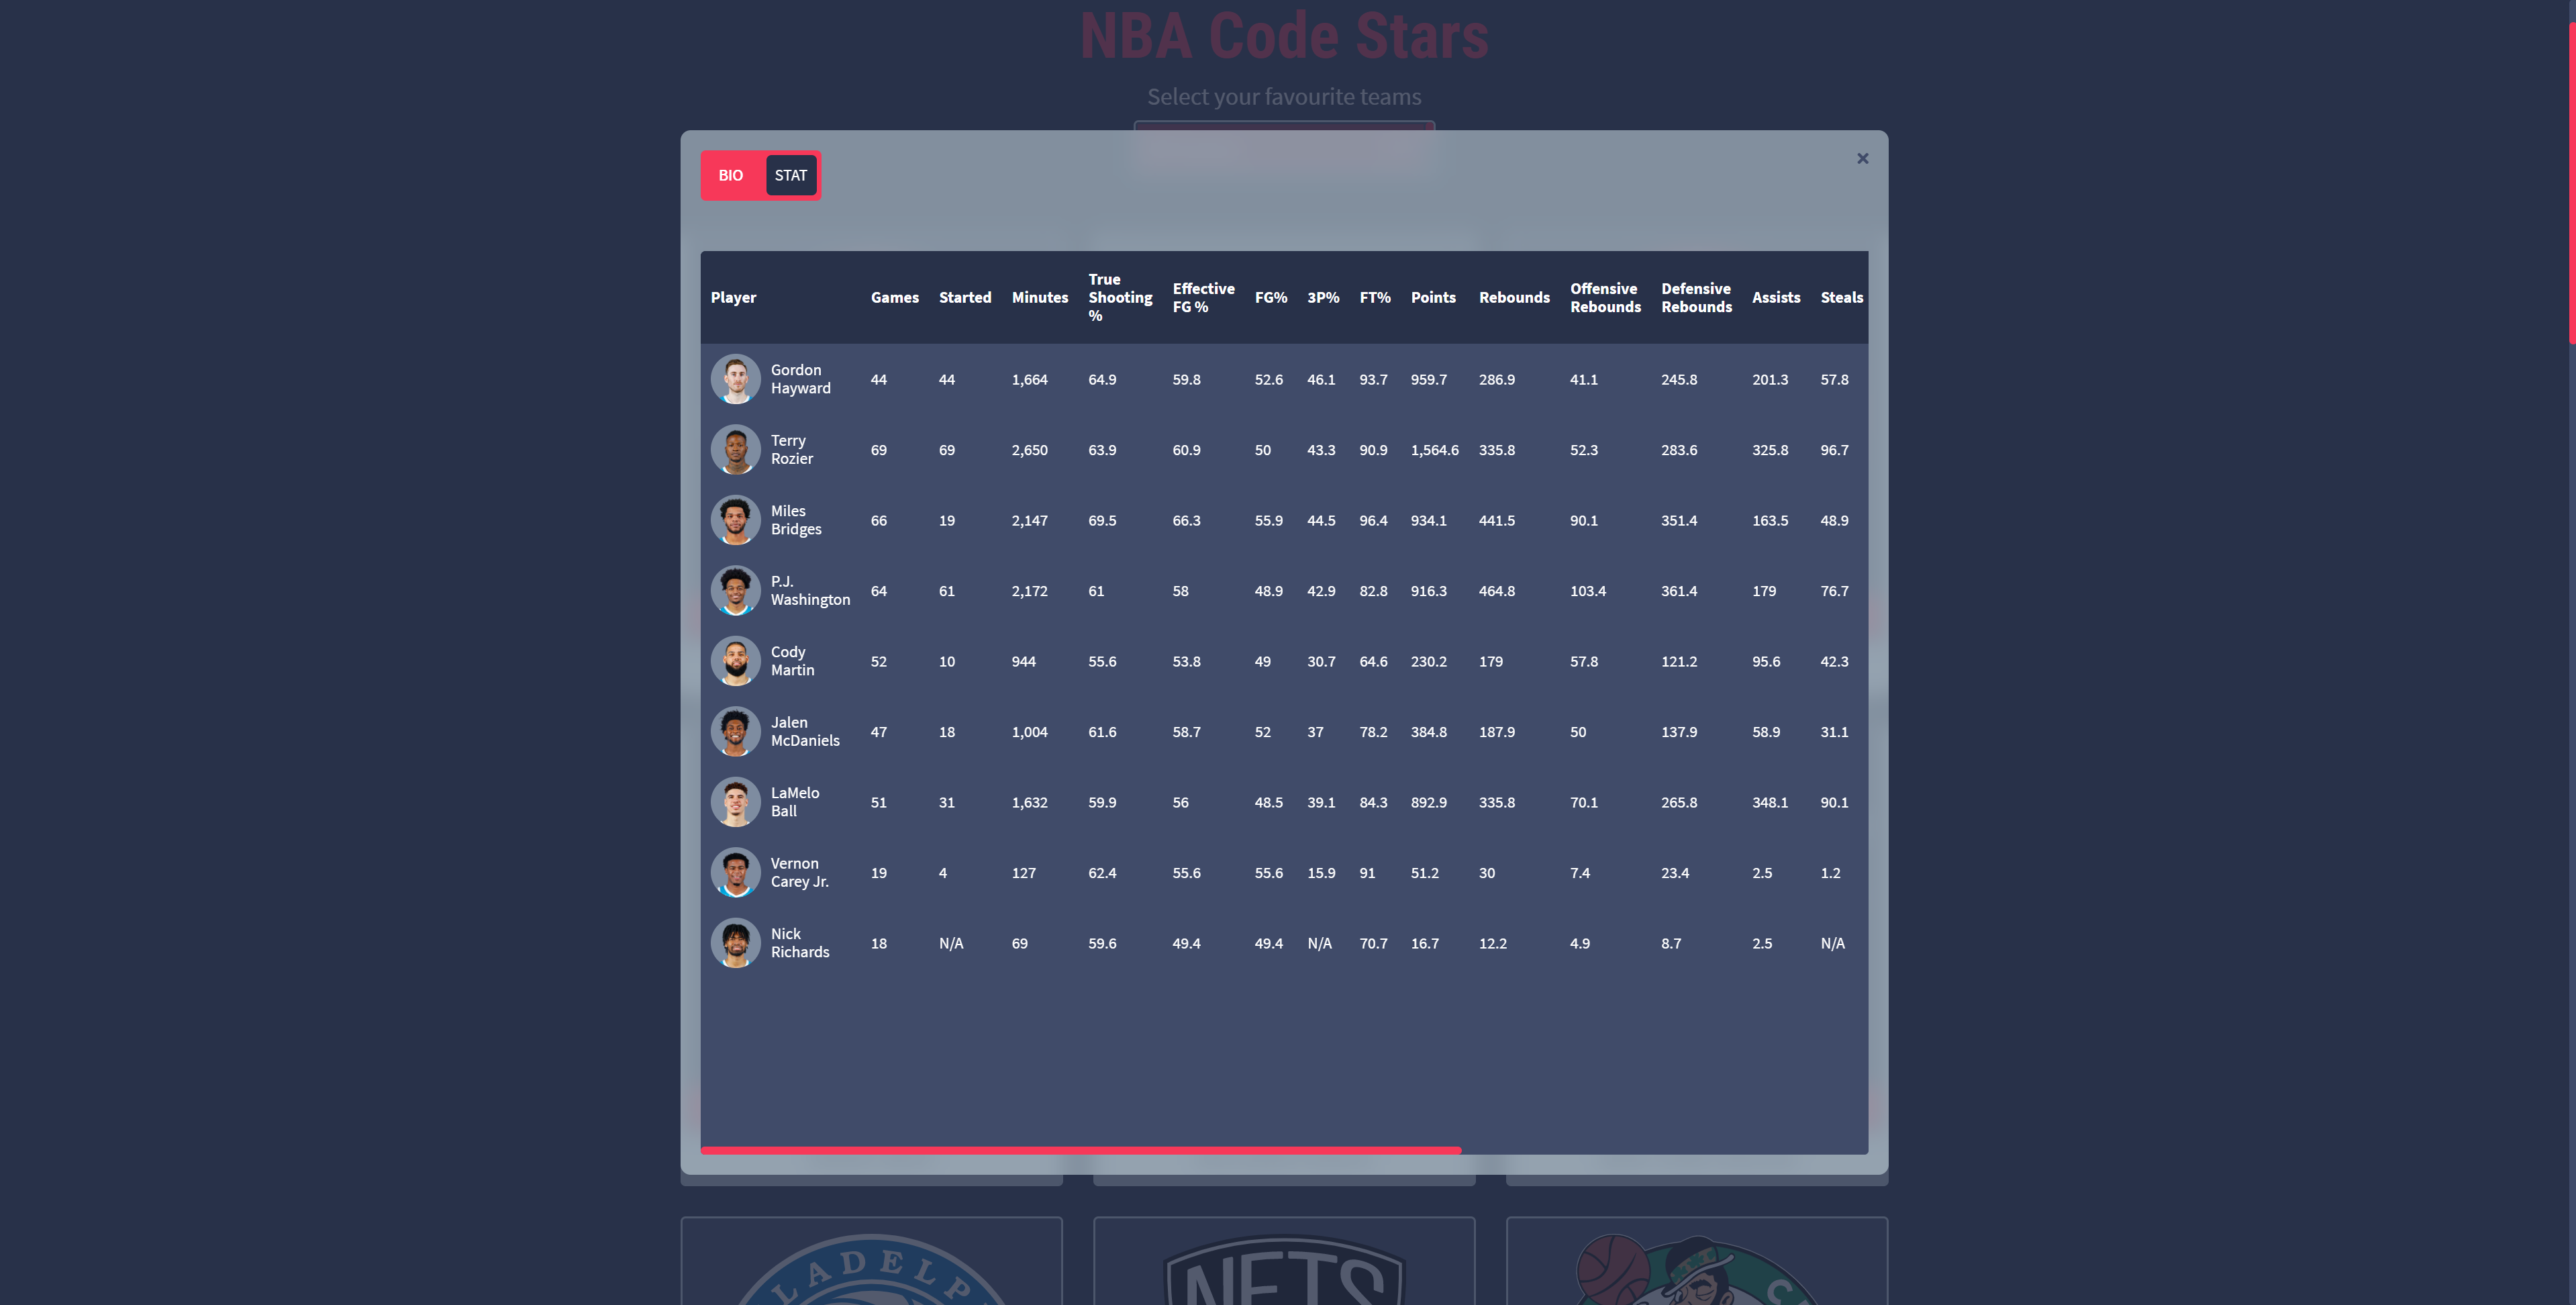 Desktop view of NBA Code Stars, a website to find your favourite NBA teams and search for roster stats created by the team of Andrew Craig and Kaunain Karmali.